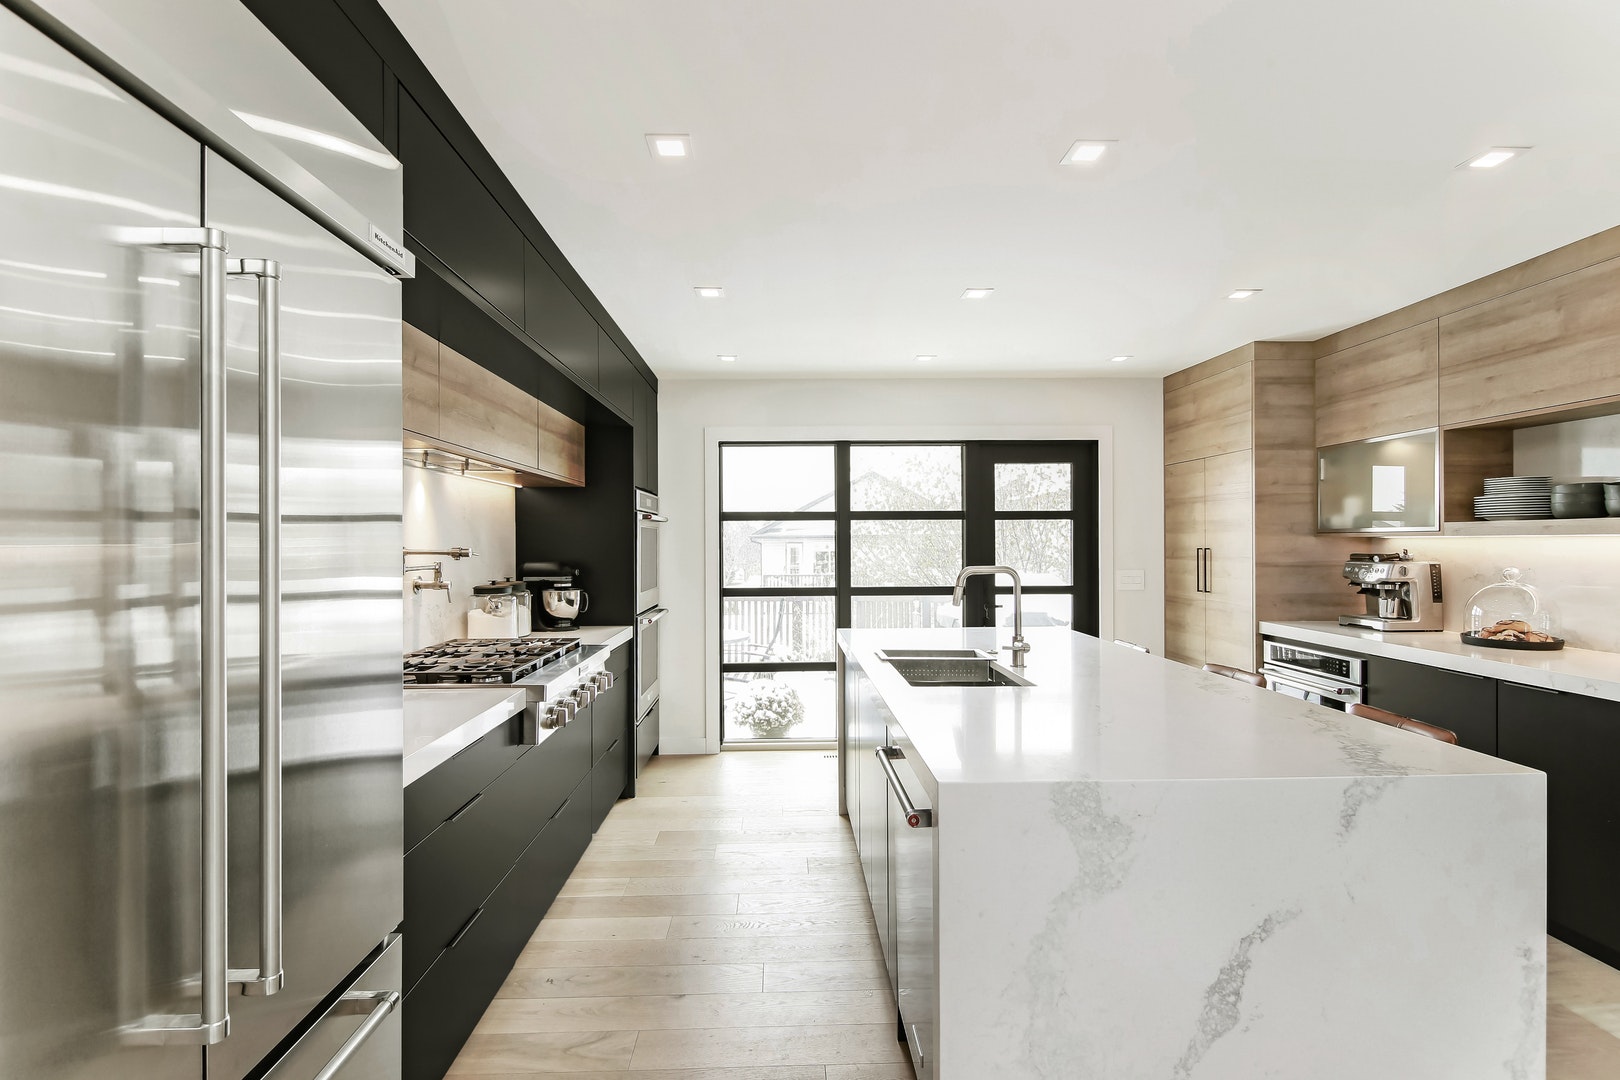 Kitchen renovation with white island and dark cabinets in "Modern Makeover" by RenoMark Member Reborn Renovations, Finalist in the 2021 CHBA National Awards for Housing Excellence.